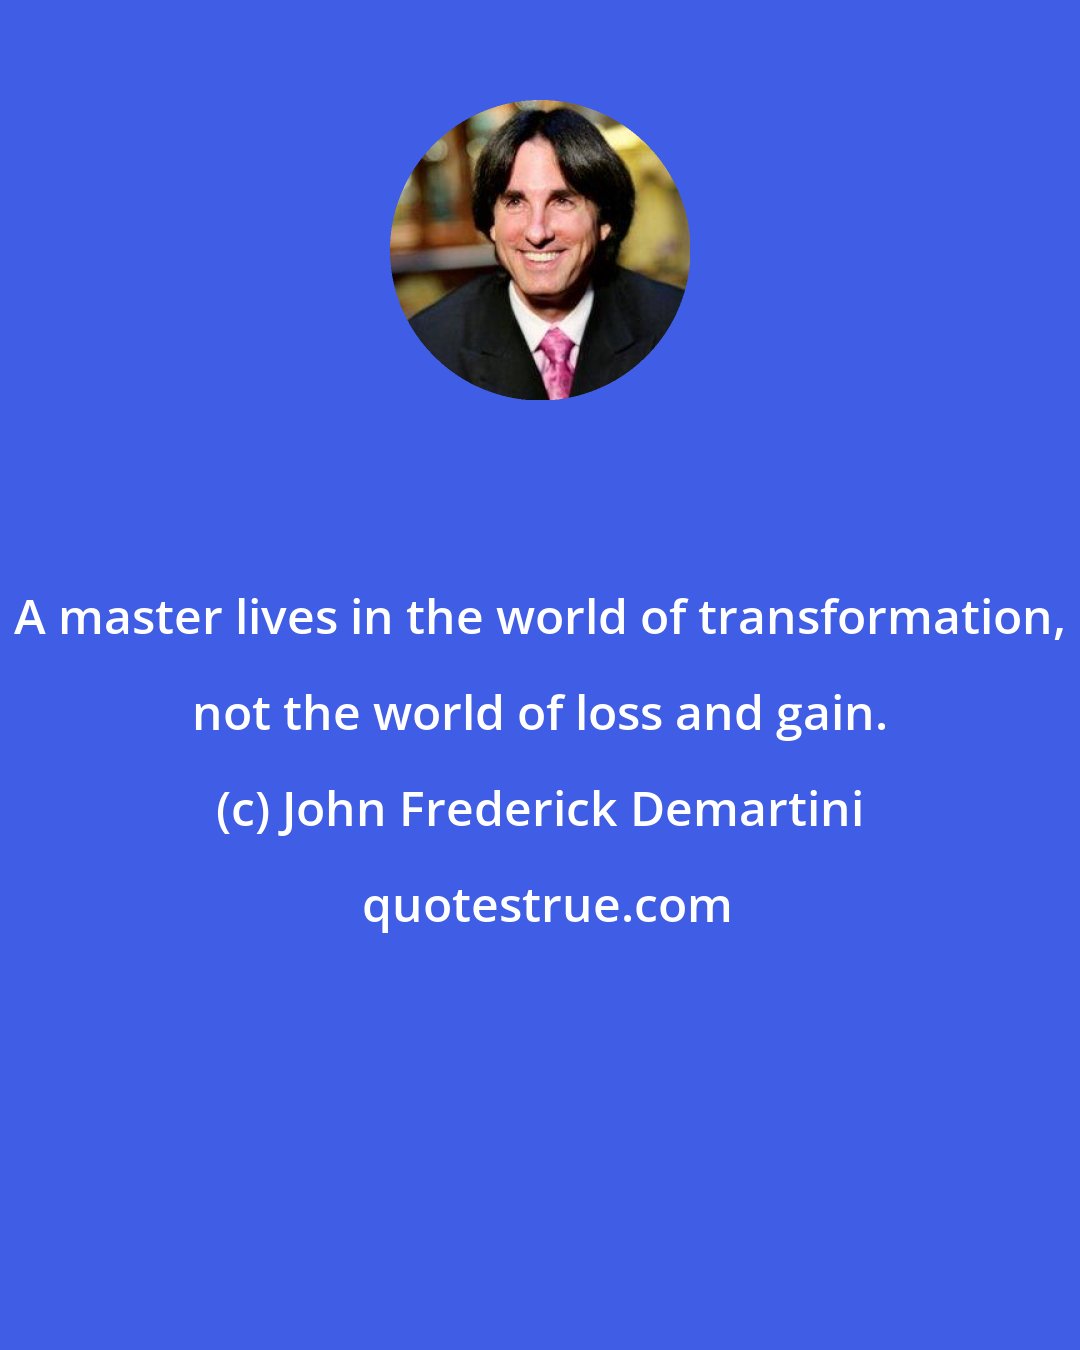 John Frederick Demartini: A master lives in the world of transformation, not the world of loss and gain.